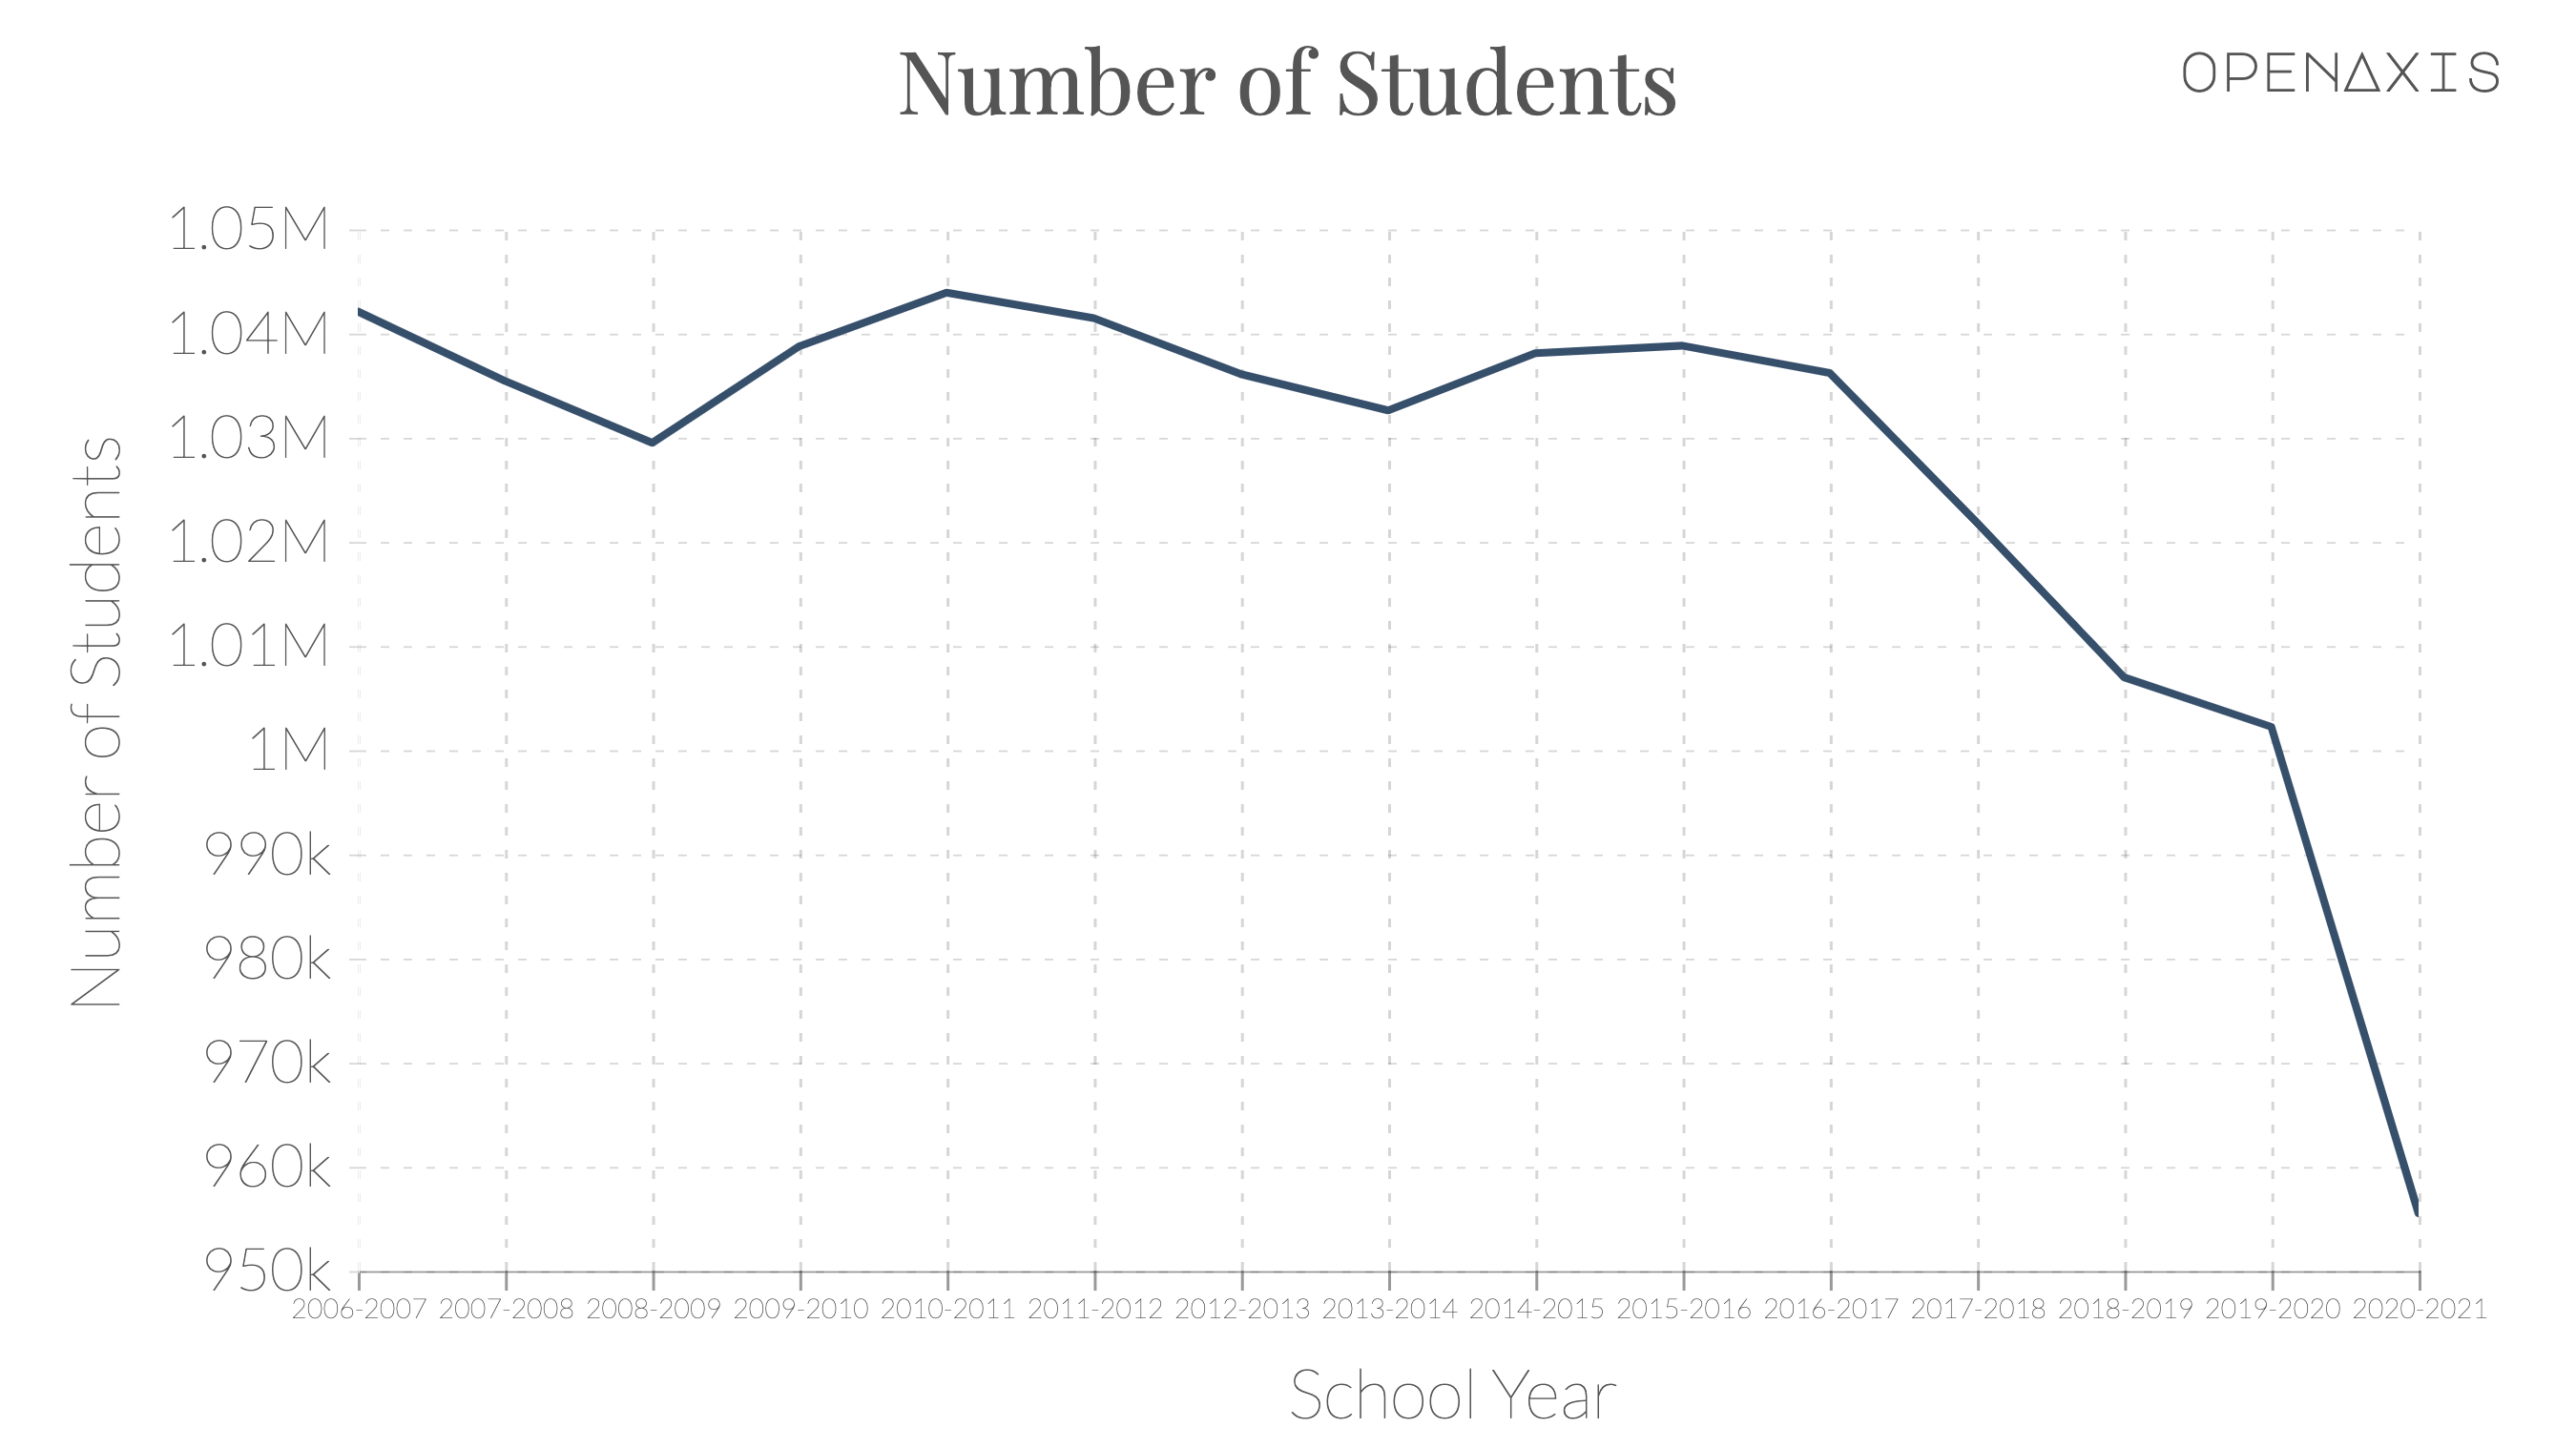 "Number of Students"